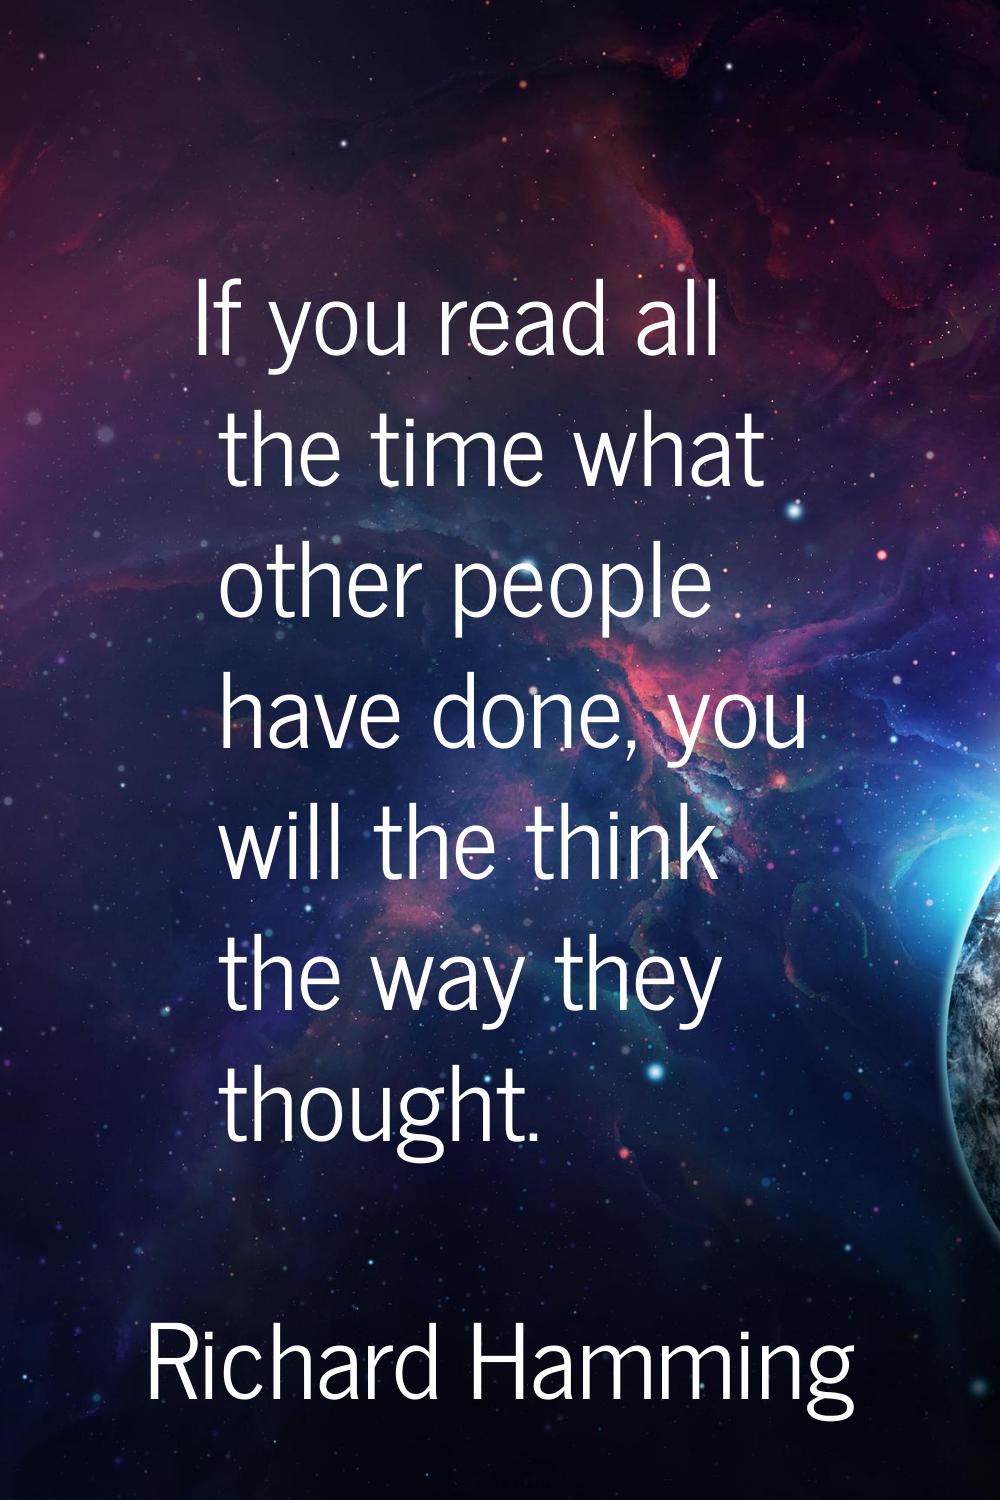 If you read all the time what other people have done, you will the think the way they thought.